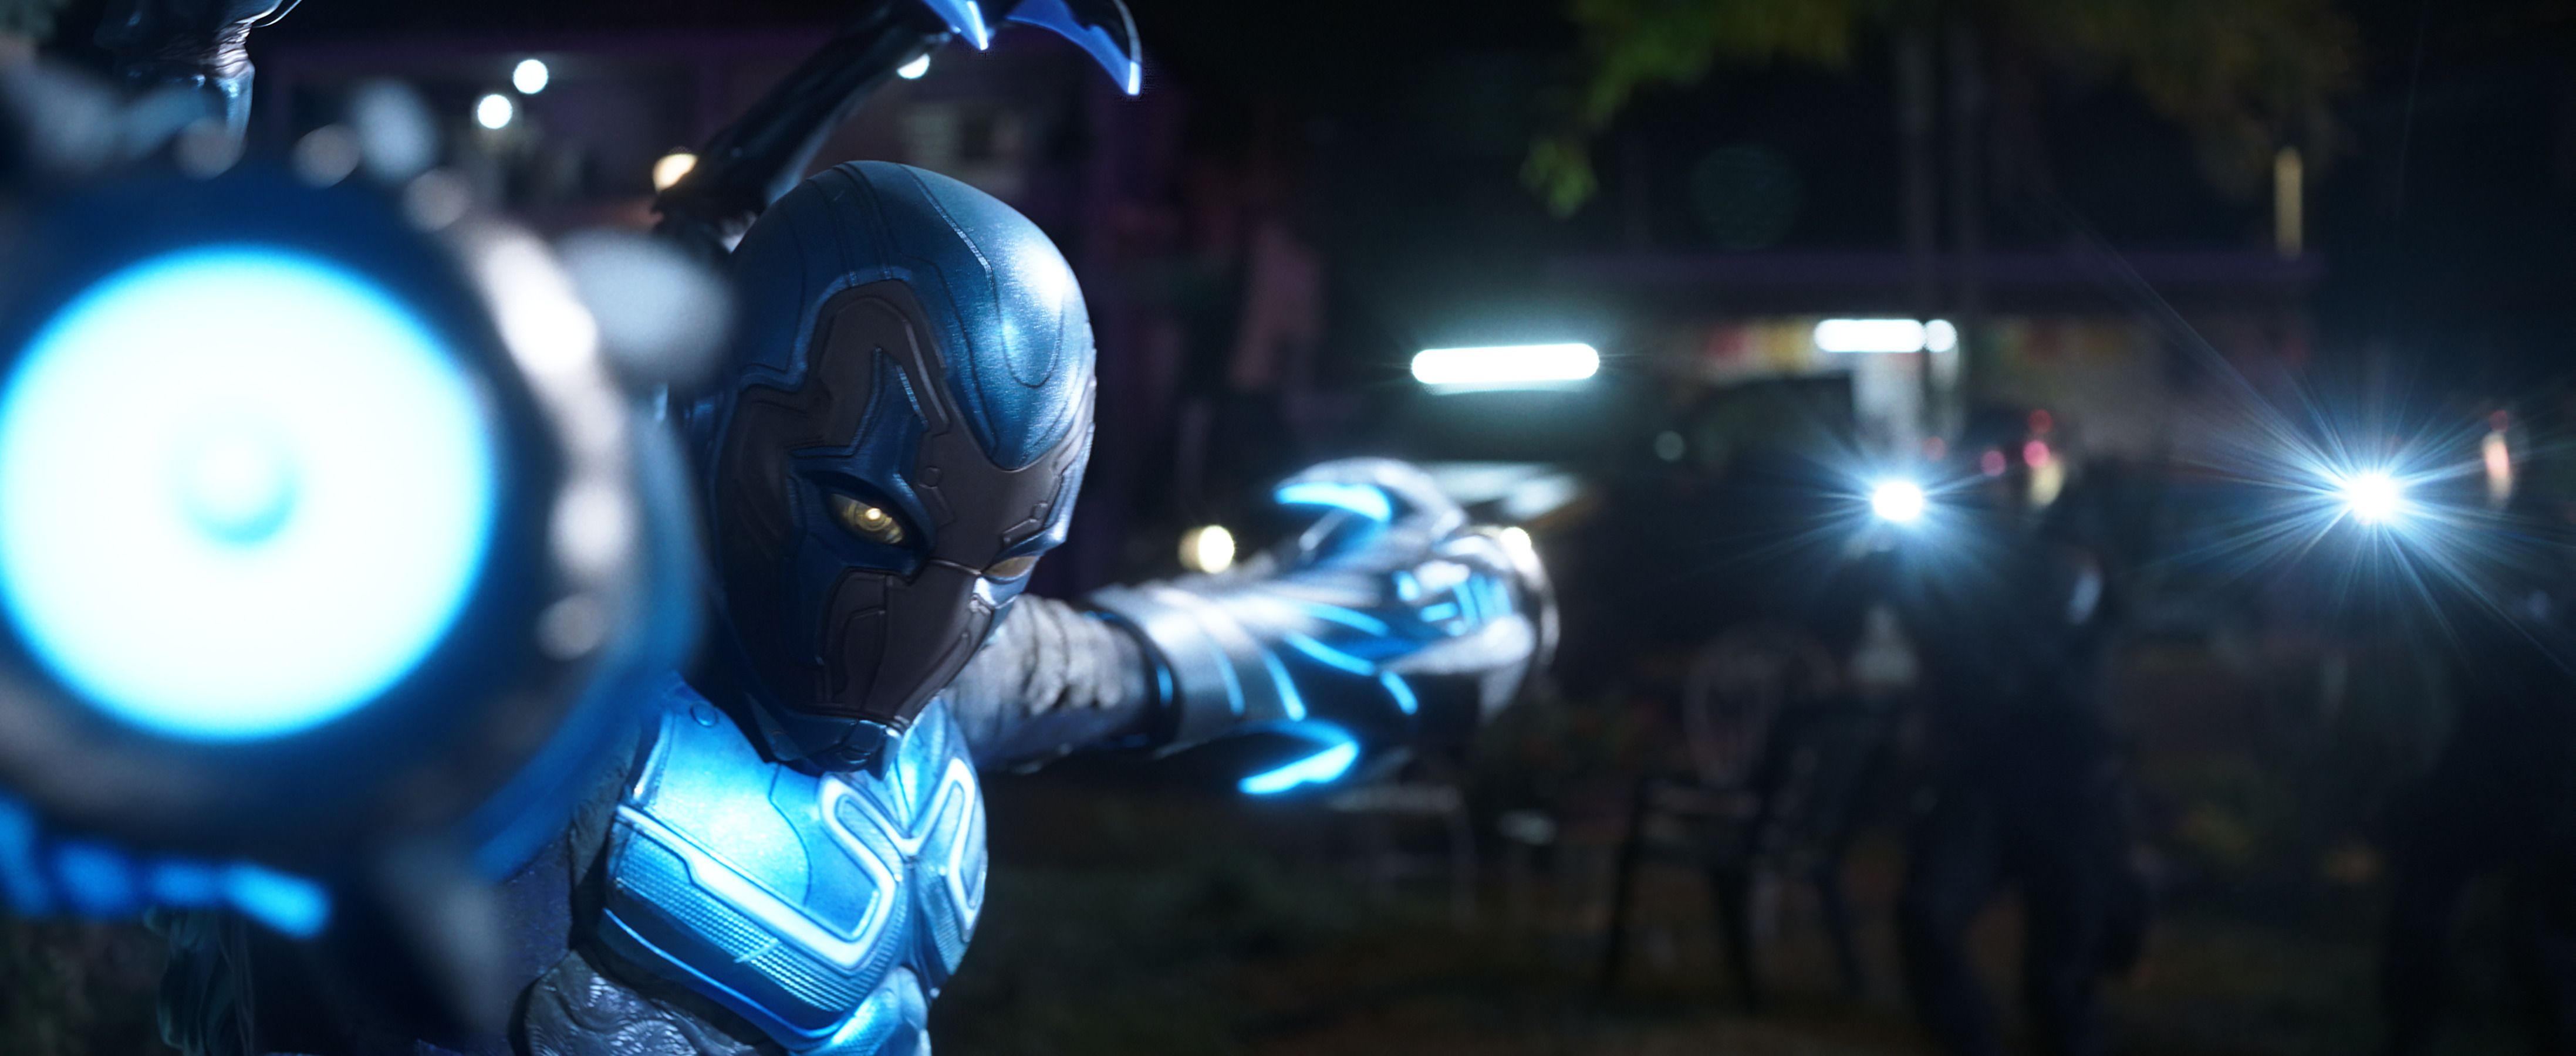 How to watch Blue Beetle right now - is it available to stream?